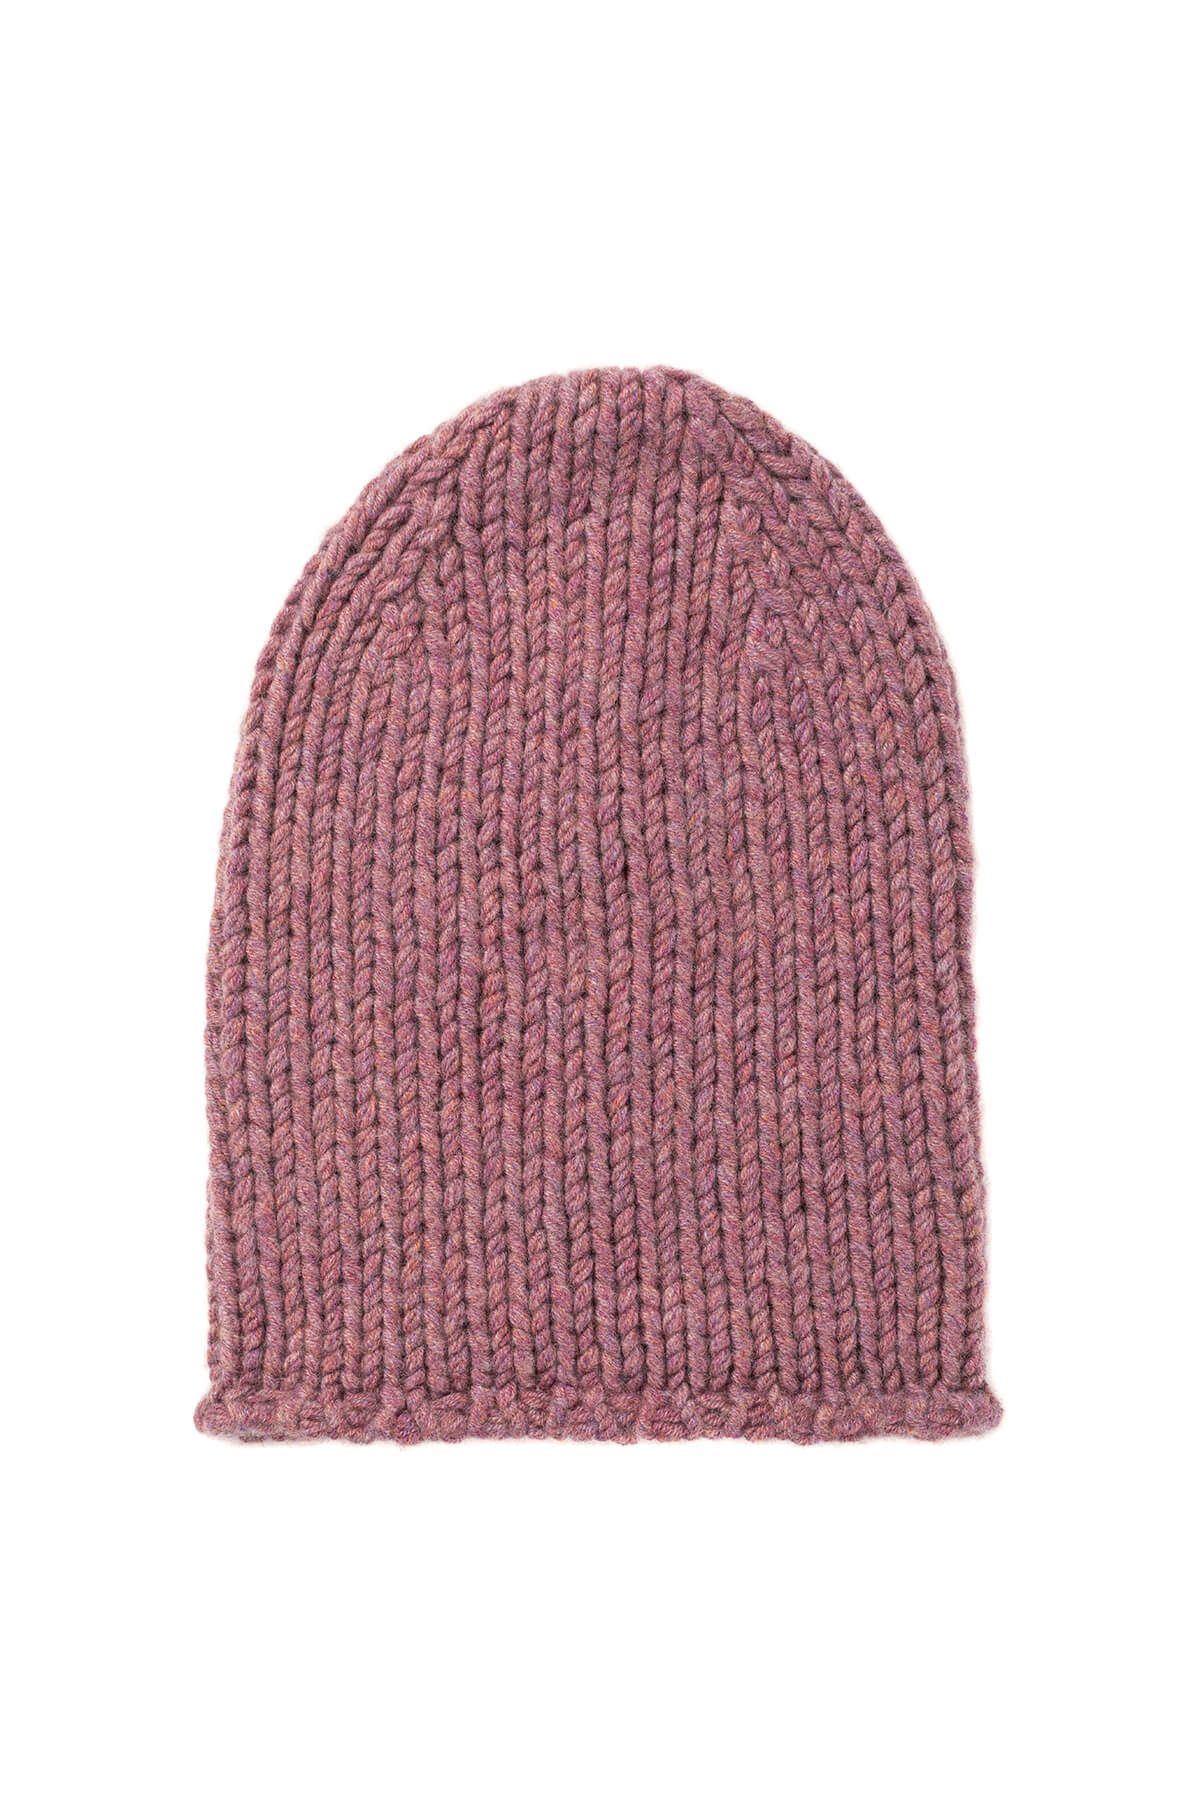 Johnstons of Elgin’s Heather pink Chunky Jersey Cashmere Hat on a white background HAB03196HE4307